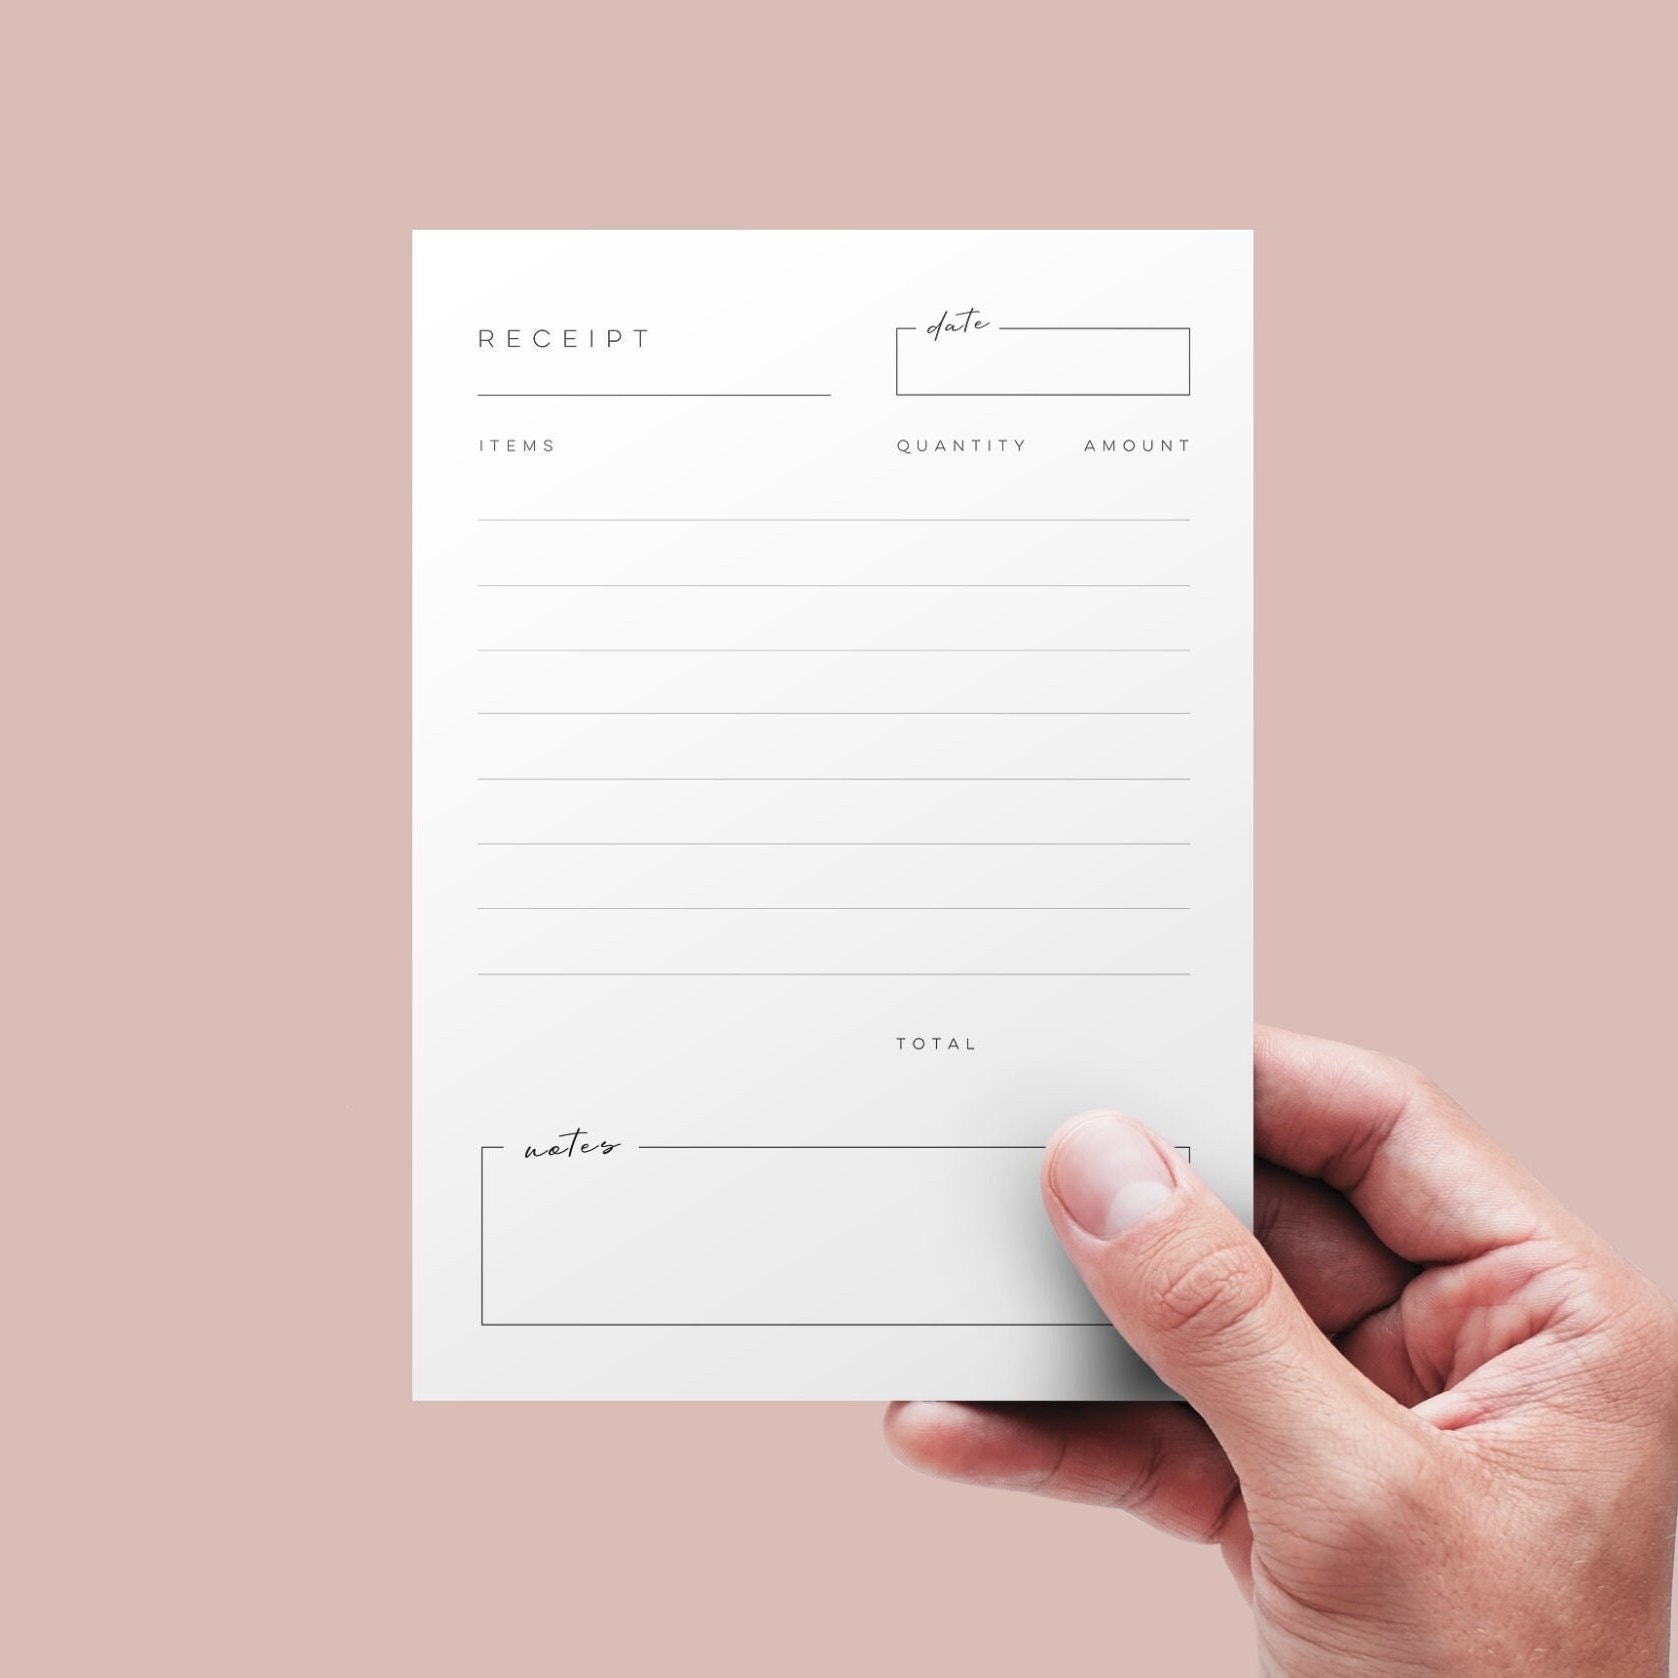 receipt-template-small-business-printable-receipt-template-customer-service-receipt-cards